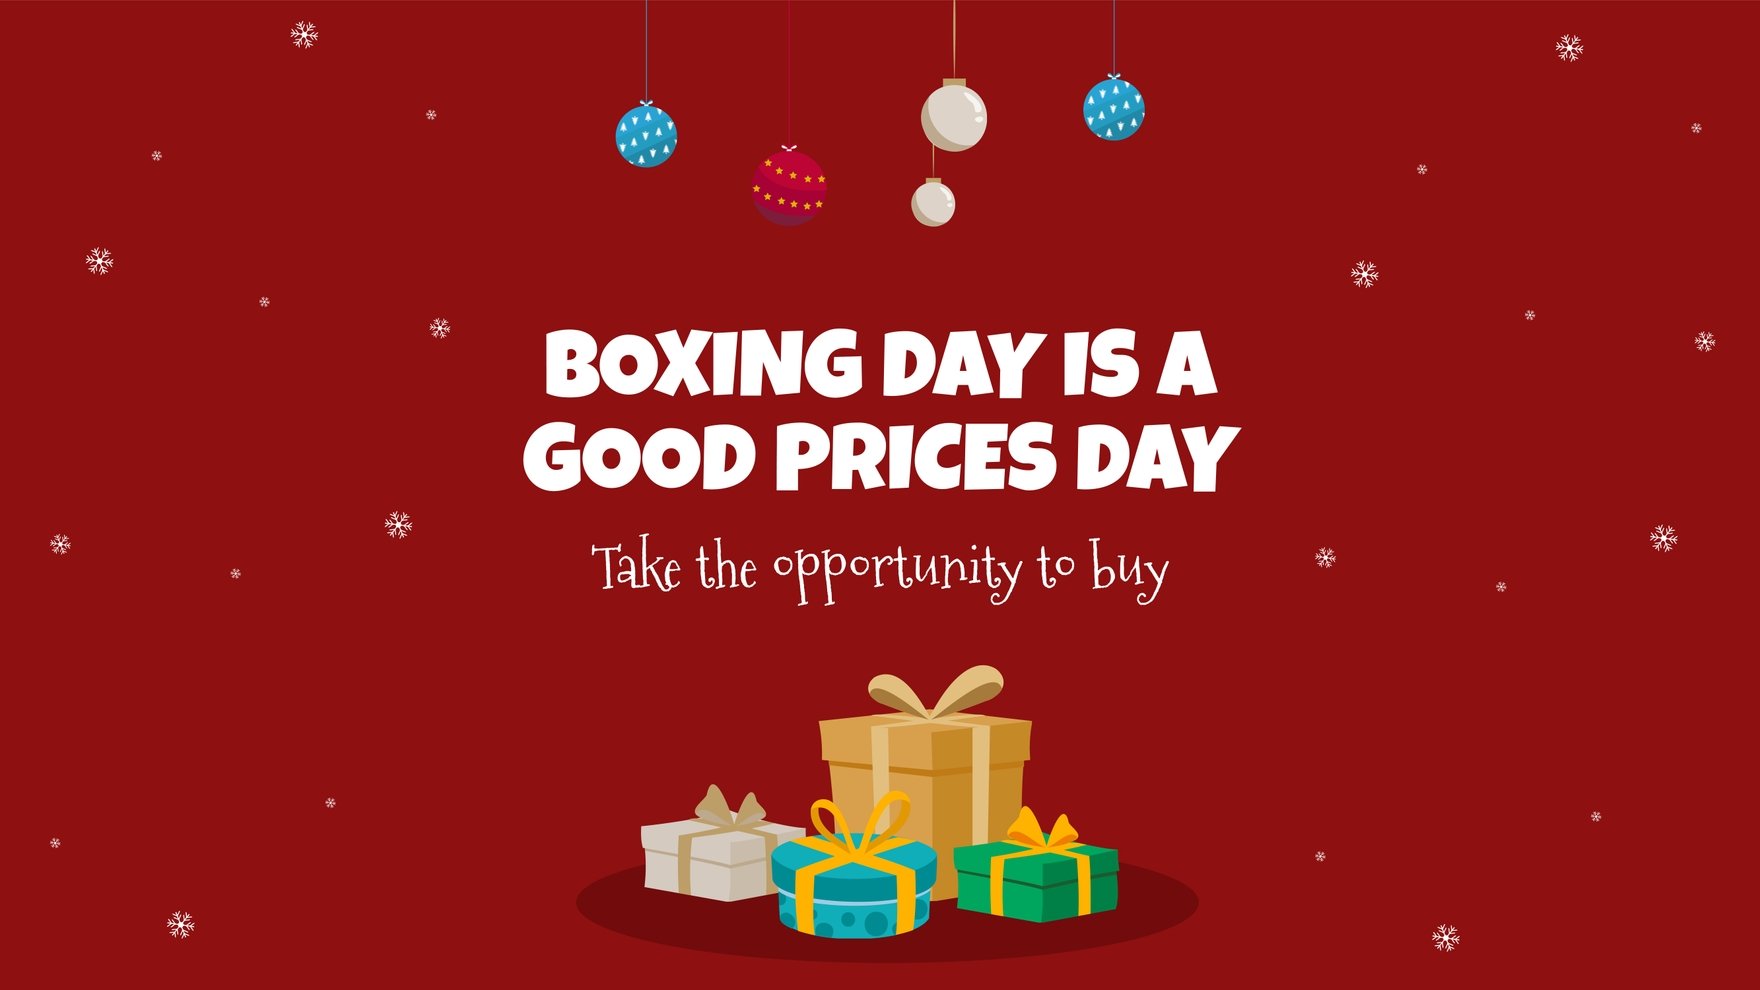 Boxing Day Youtube Cover in Illustrator, PSD, EPS, SVG, PNG, JPEG